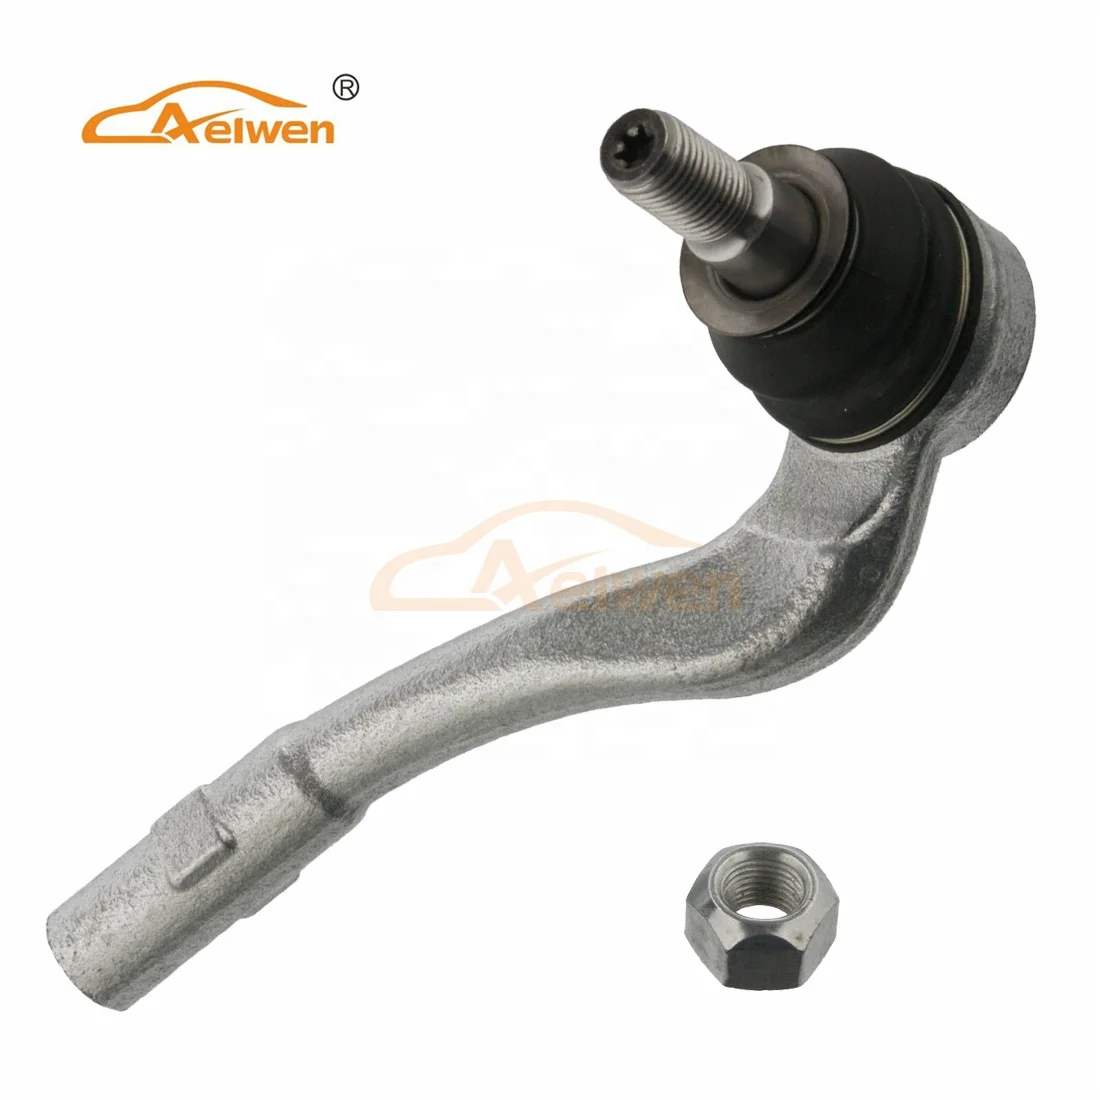 
Car Tie Rod End used for C Class Left: 2043300903 A2043300903 Right: 2043301003 A2043301003  (1600149008155)